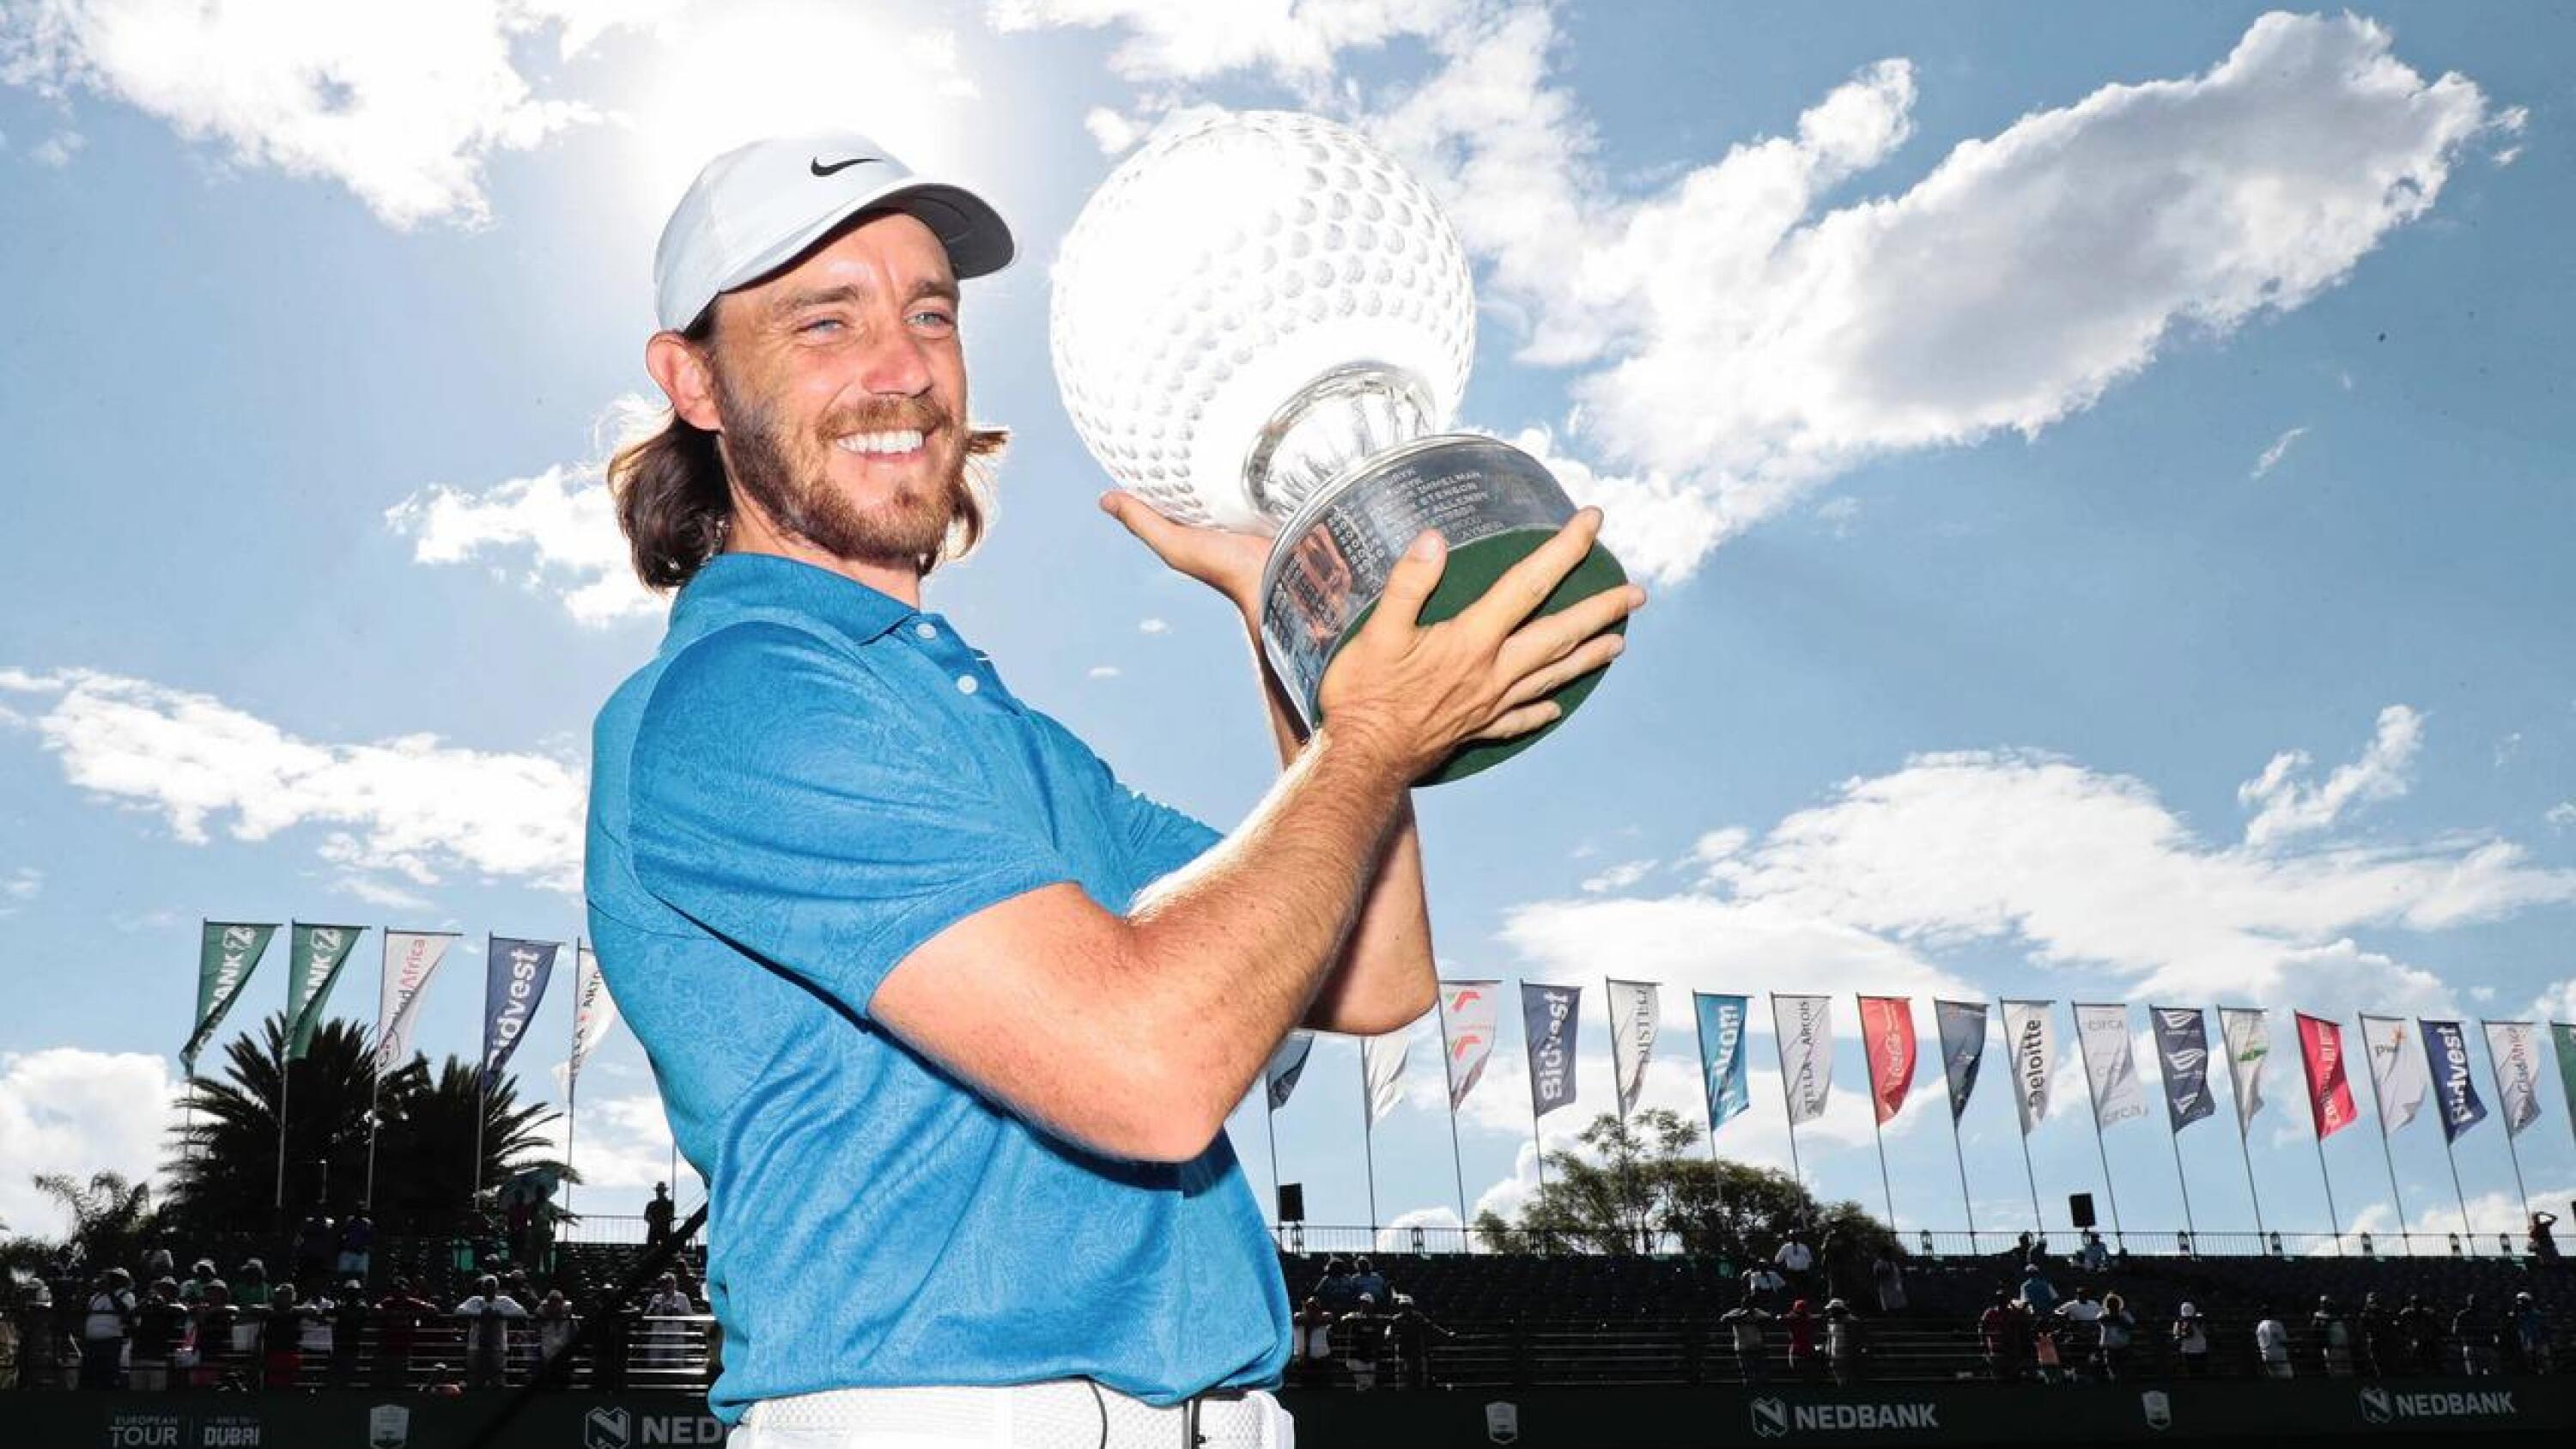 England’s Tommy Fleetwood holds up the Nedbank Golf Challenge trophy